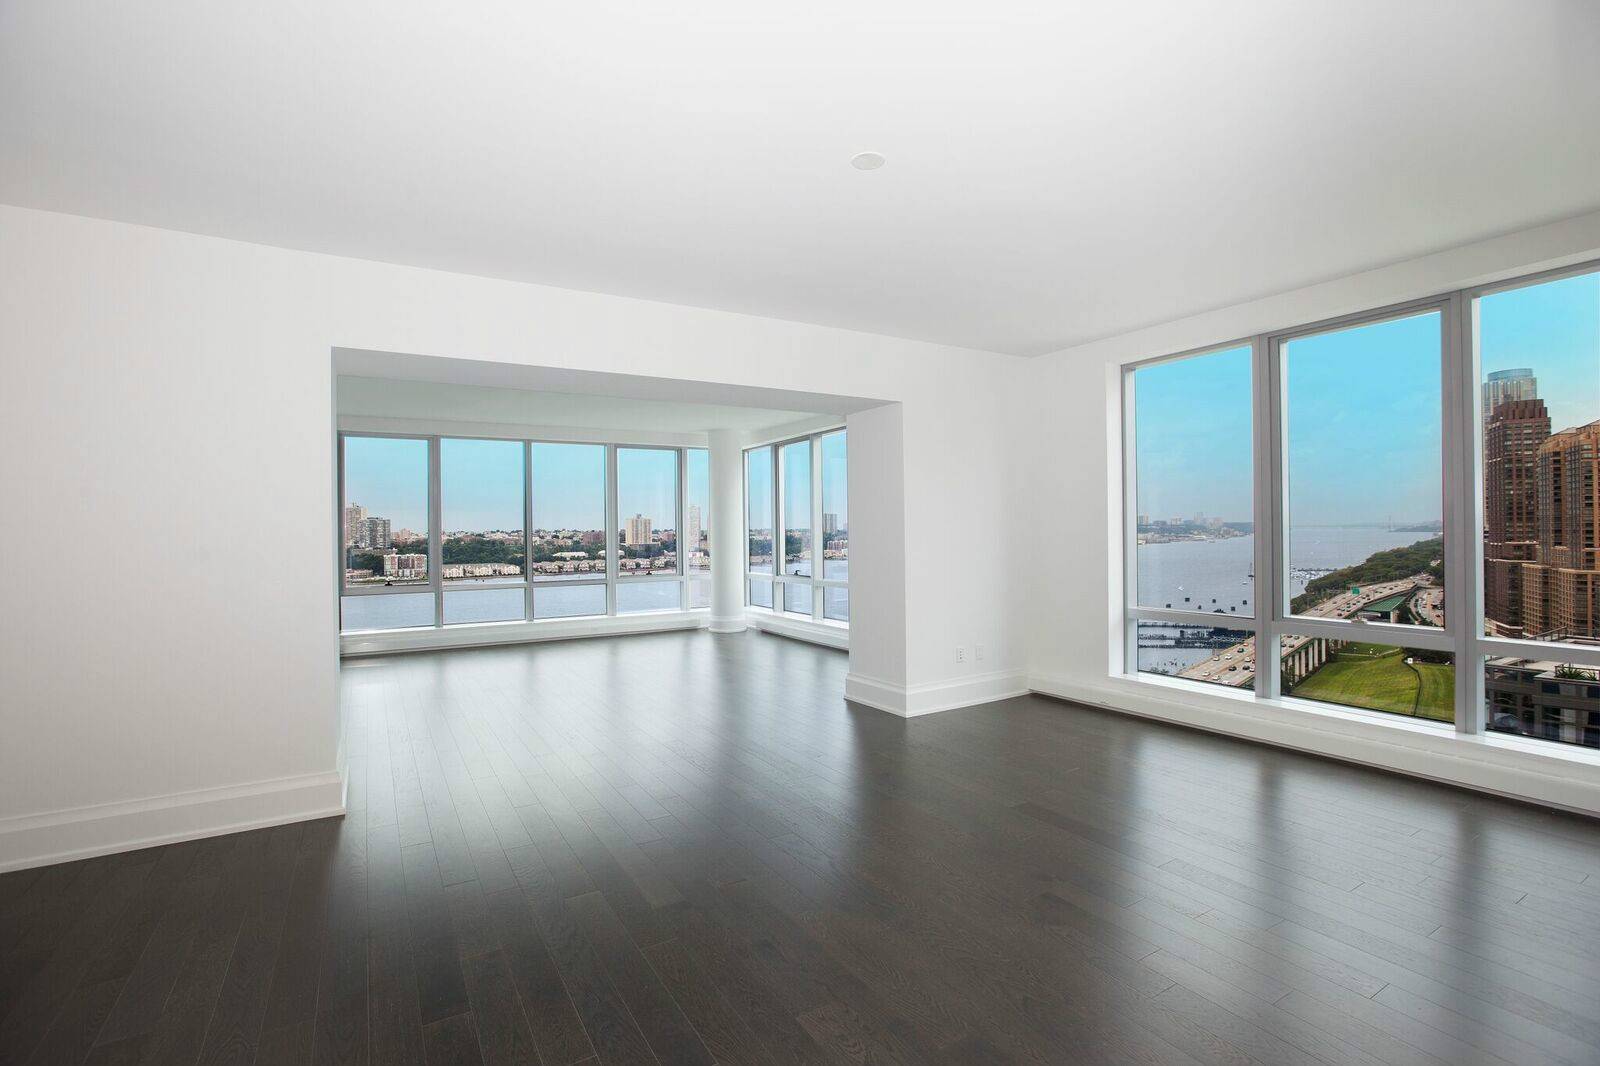 August 1st move in apartment of 3, 190 square feet, three exposures and panoramic views offers a whole new level of waterfront living in Manhattan and showcases the functional modernism ...